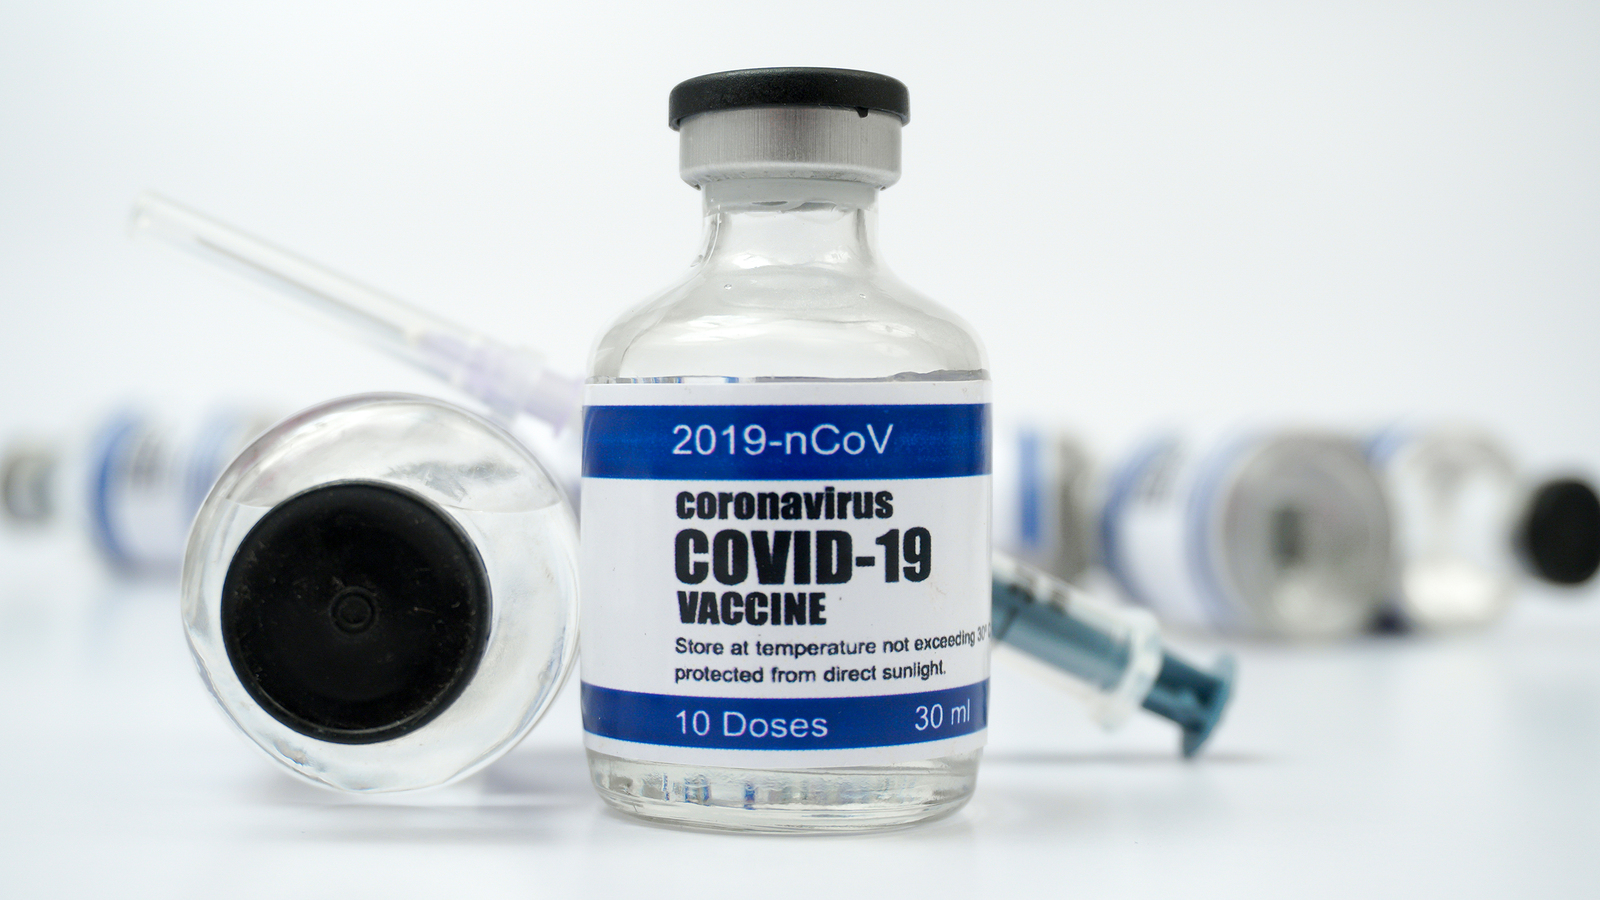 What are the side-effects from Covid vaccine rollout?